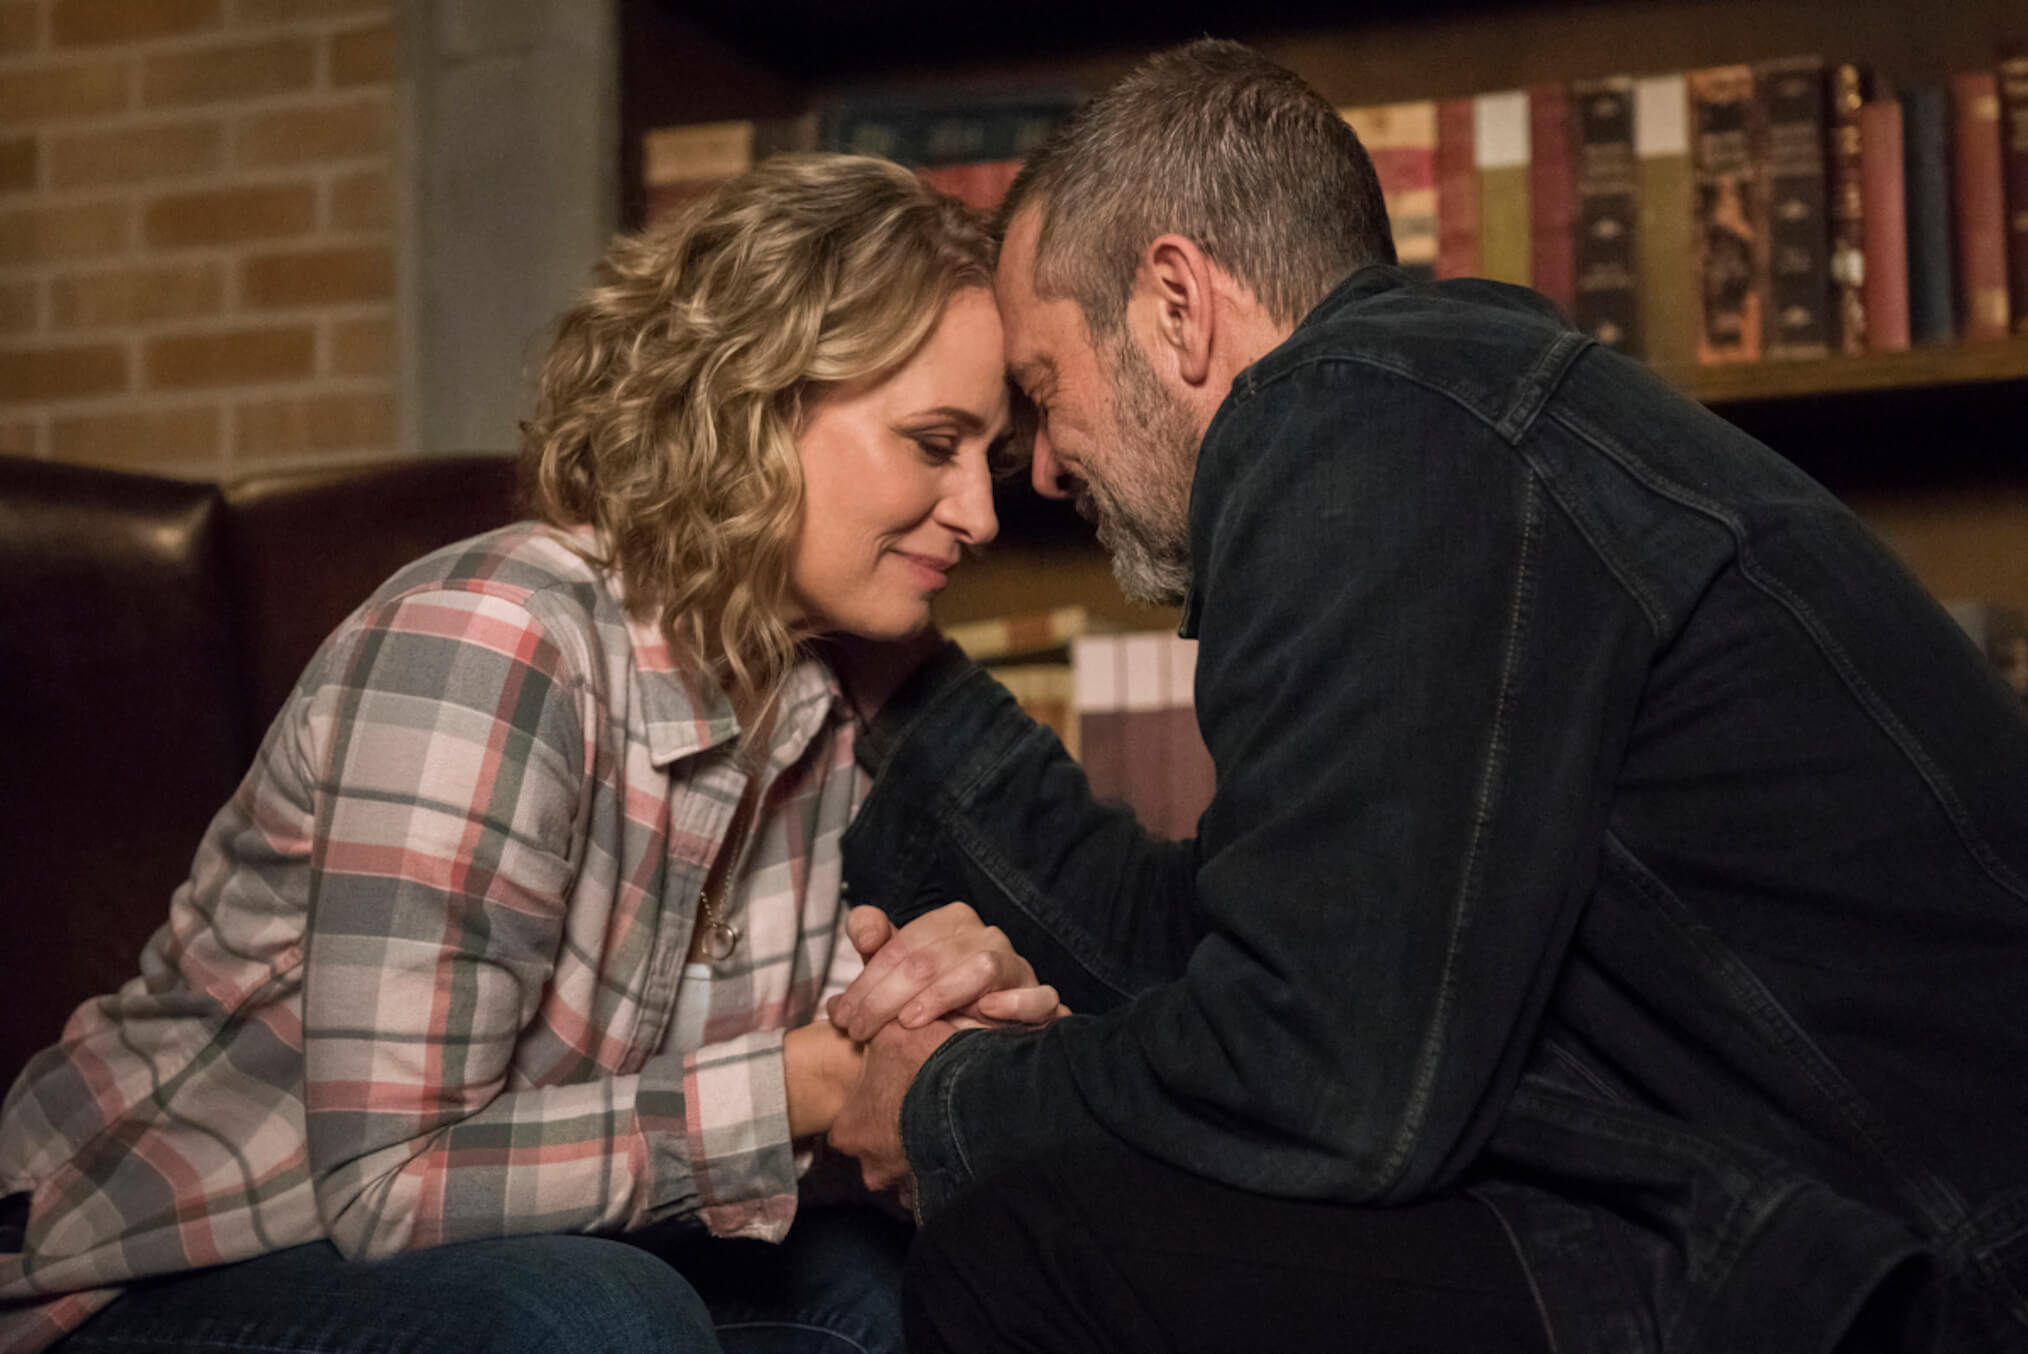 The Winchesters: Mary and John in Supernatural portrayed by Samantha Smith and Jeffrey Dean Morgan